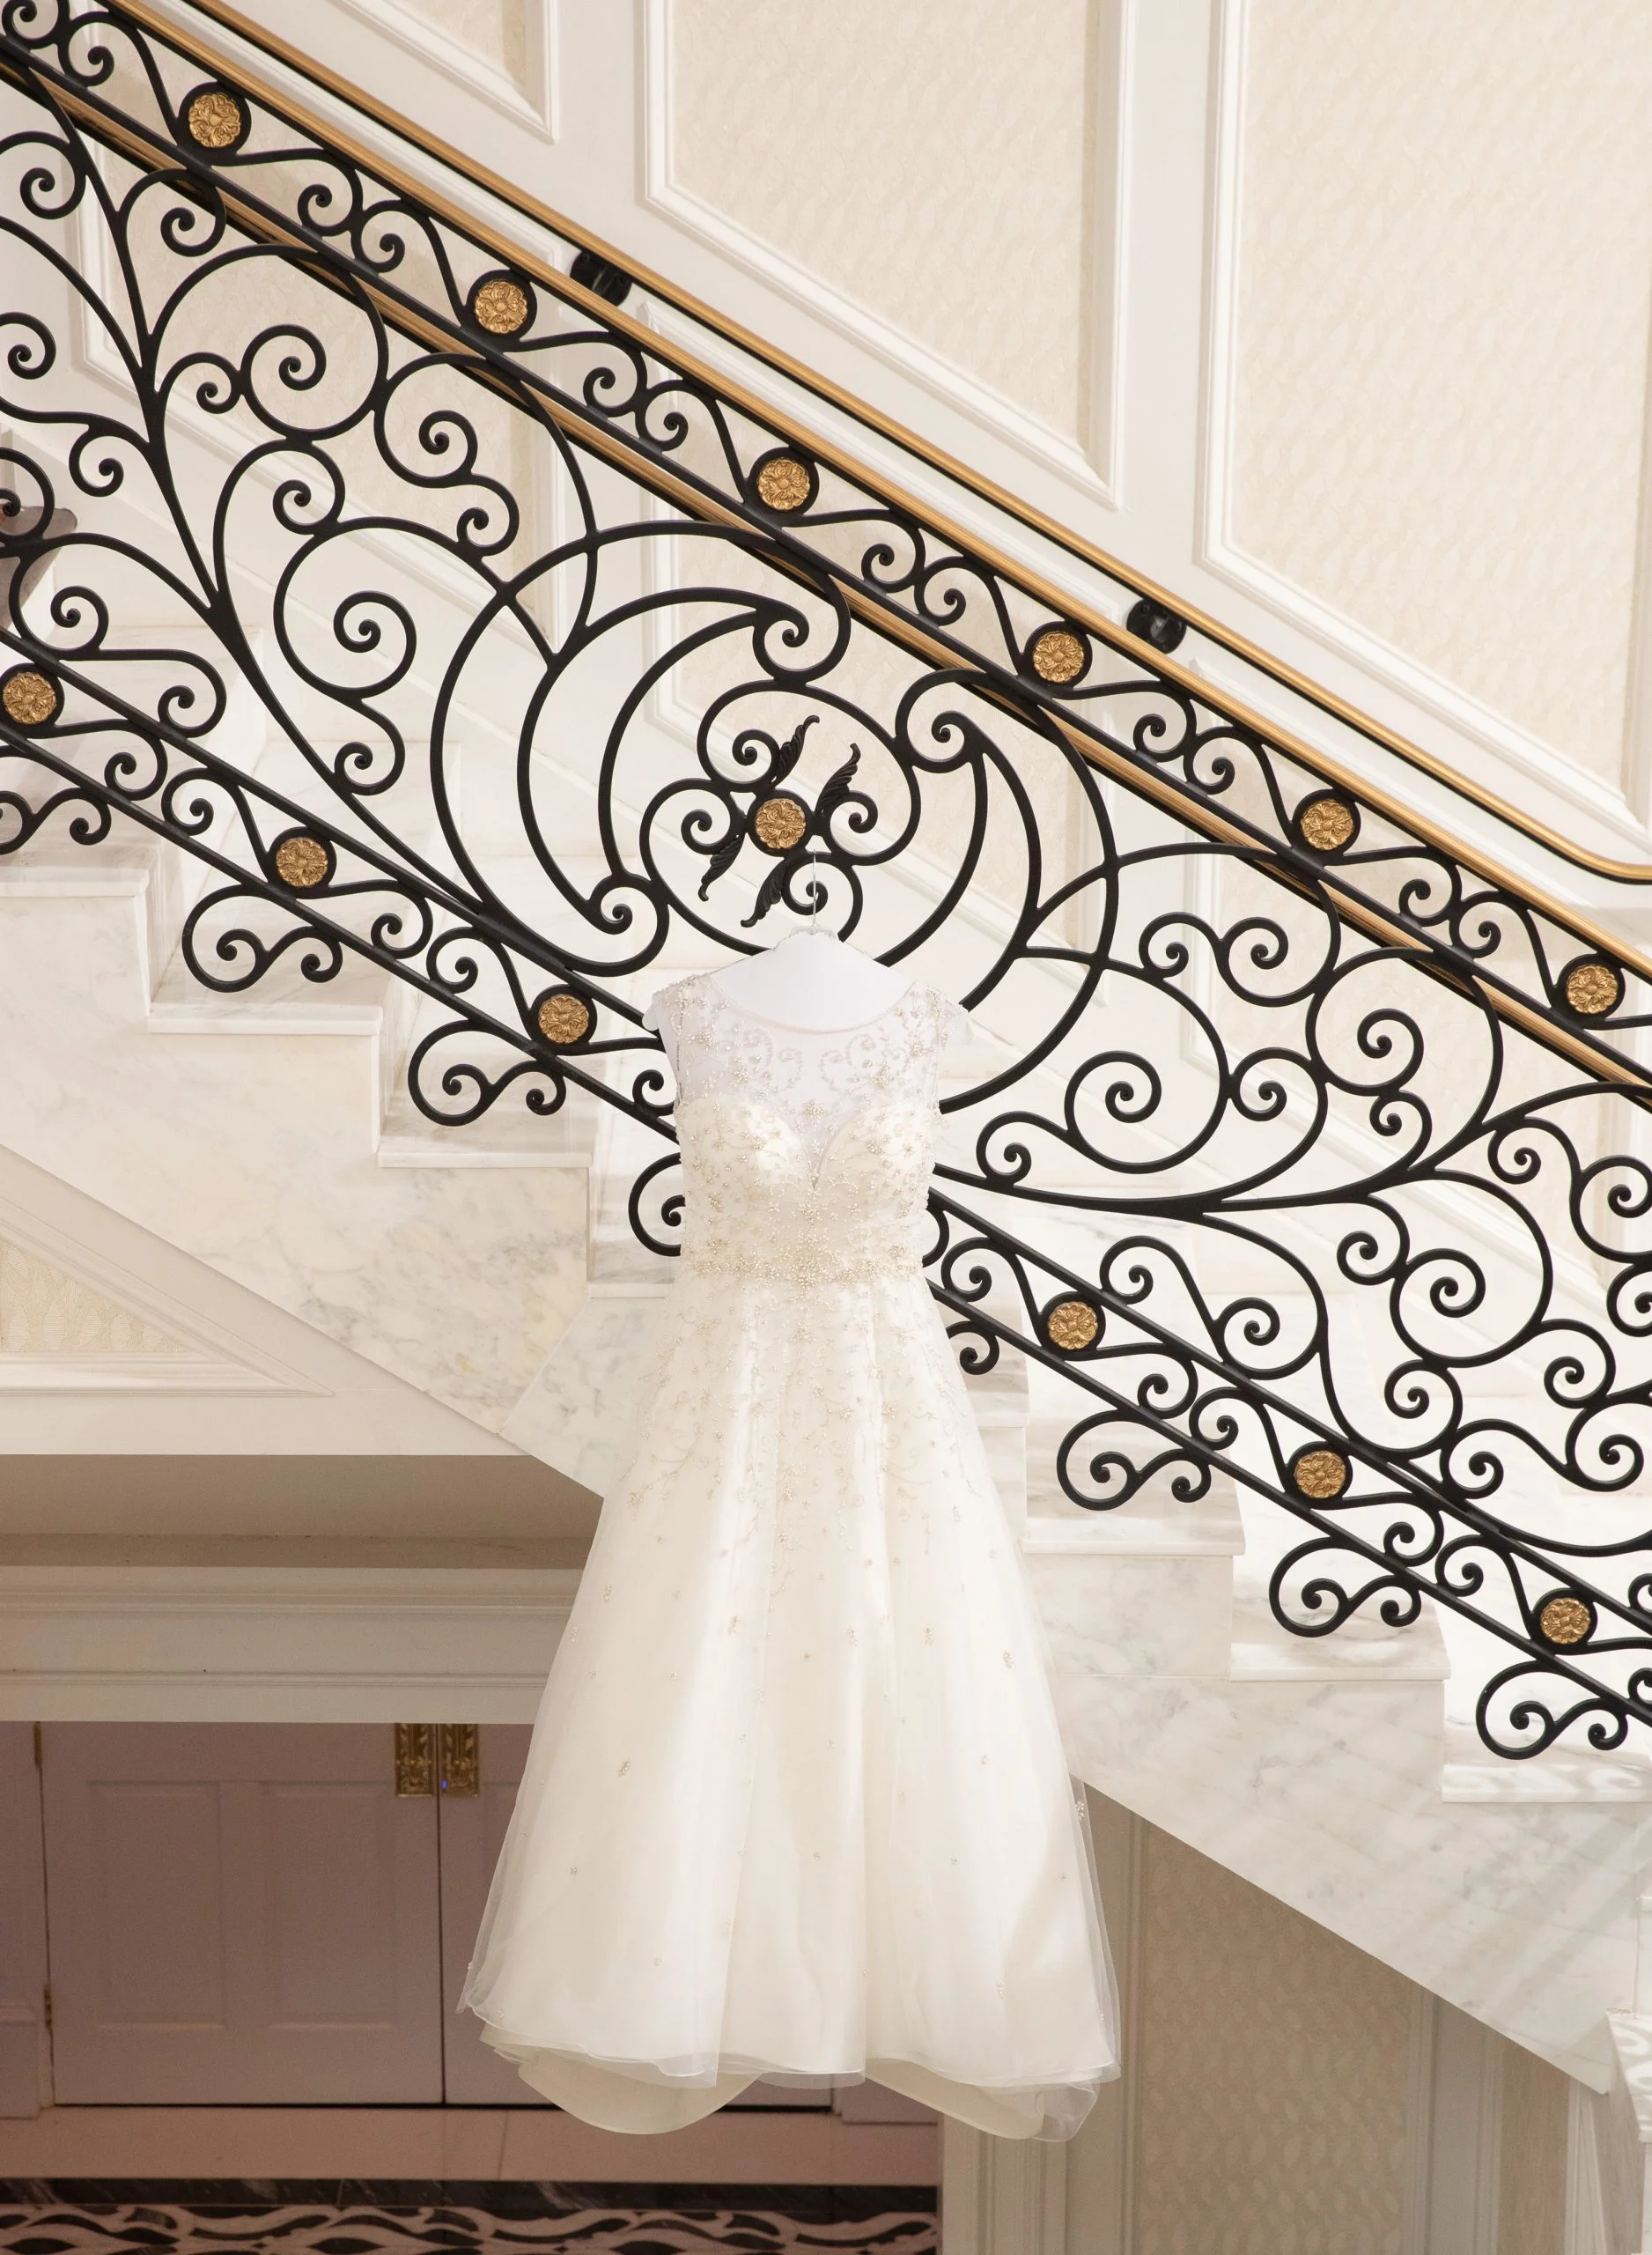 A wedding dress hangs on the stairs of a hotel.